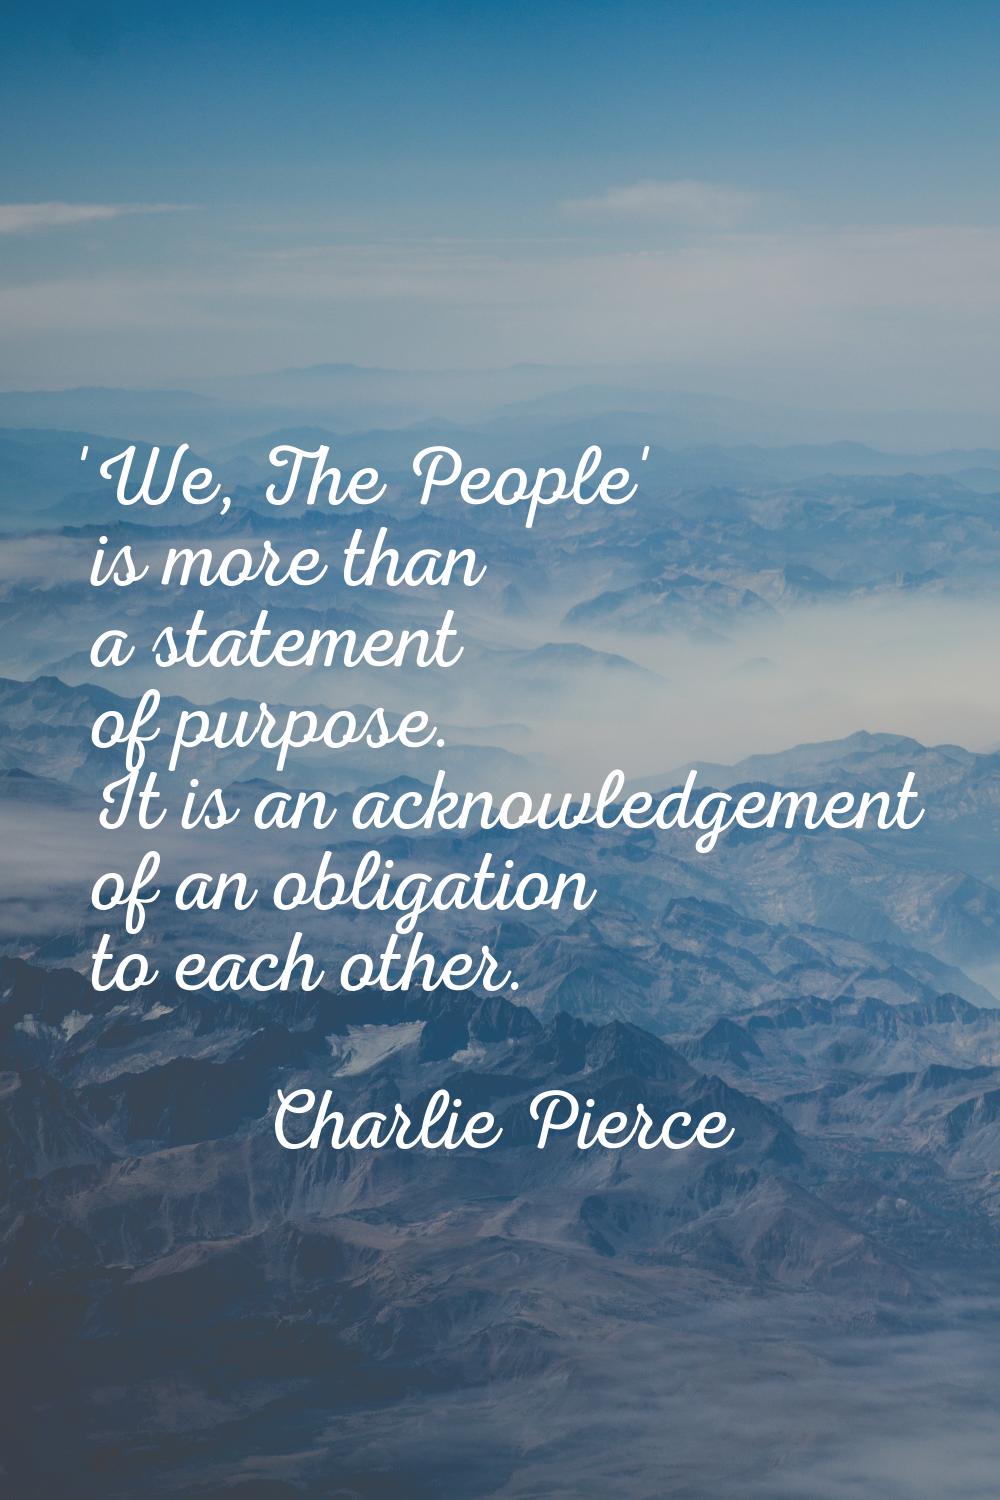 'We, The People' is more than a statement of purpose. It is an acknowledgement of an obligation to 